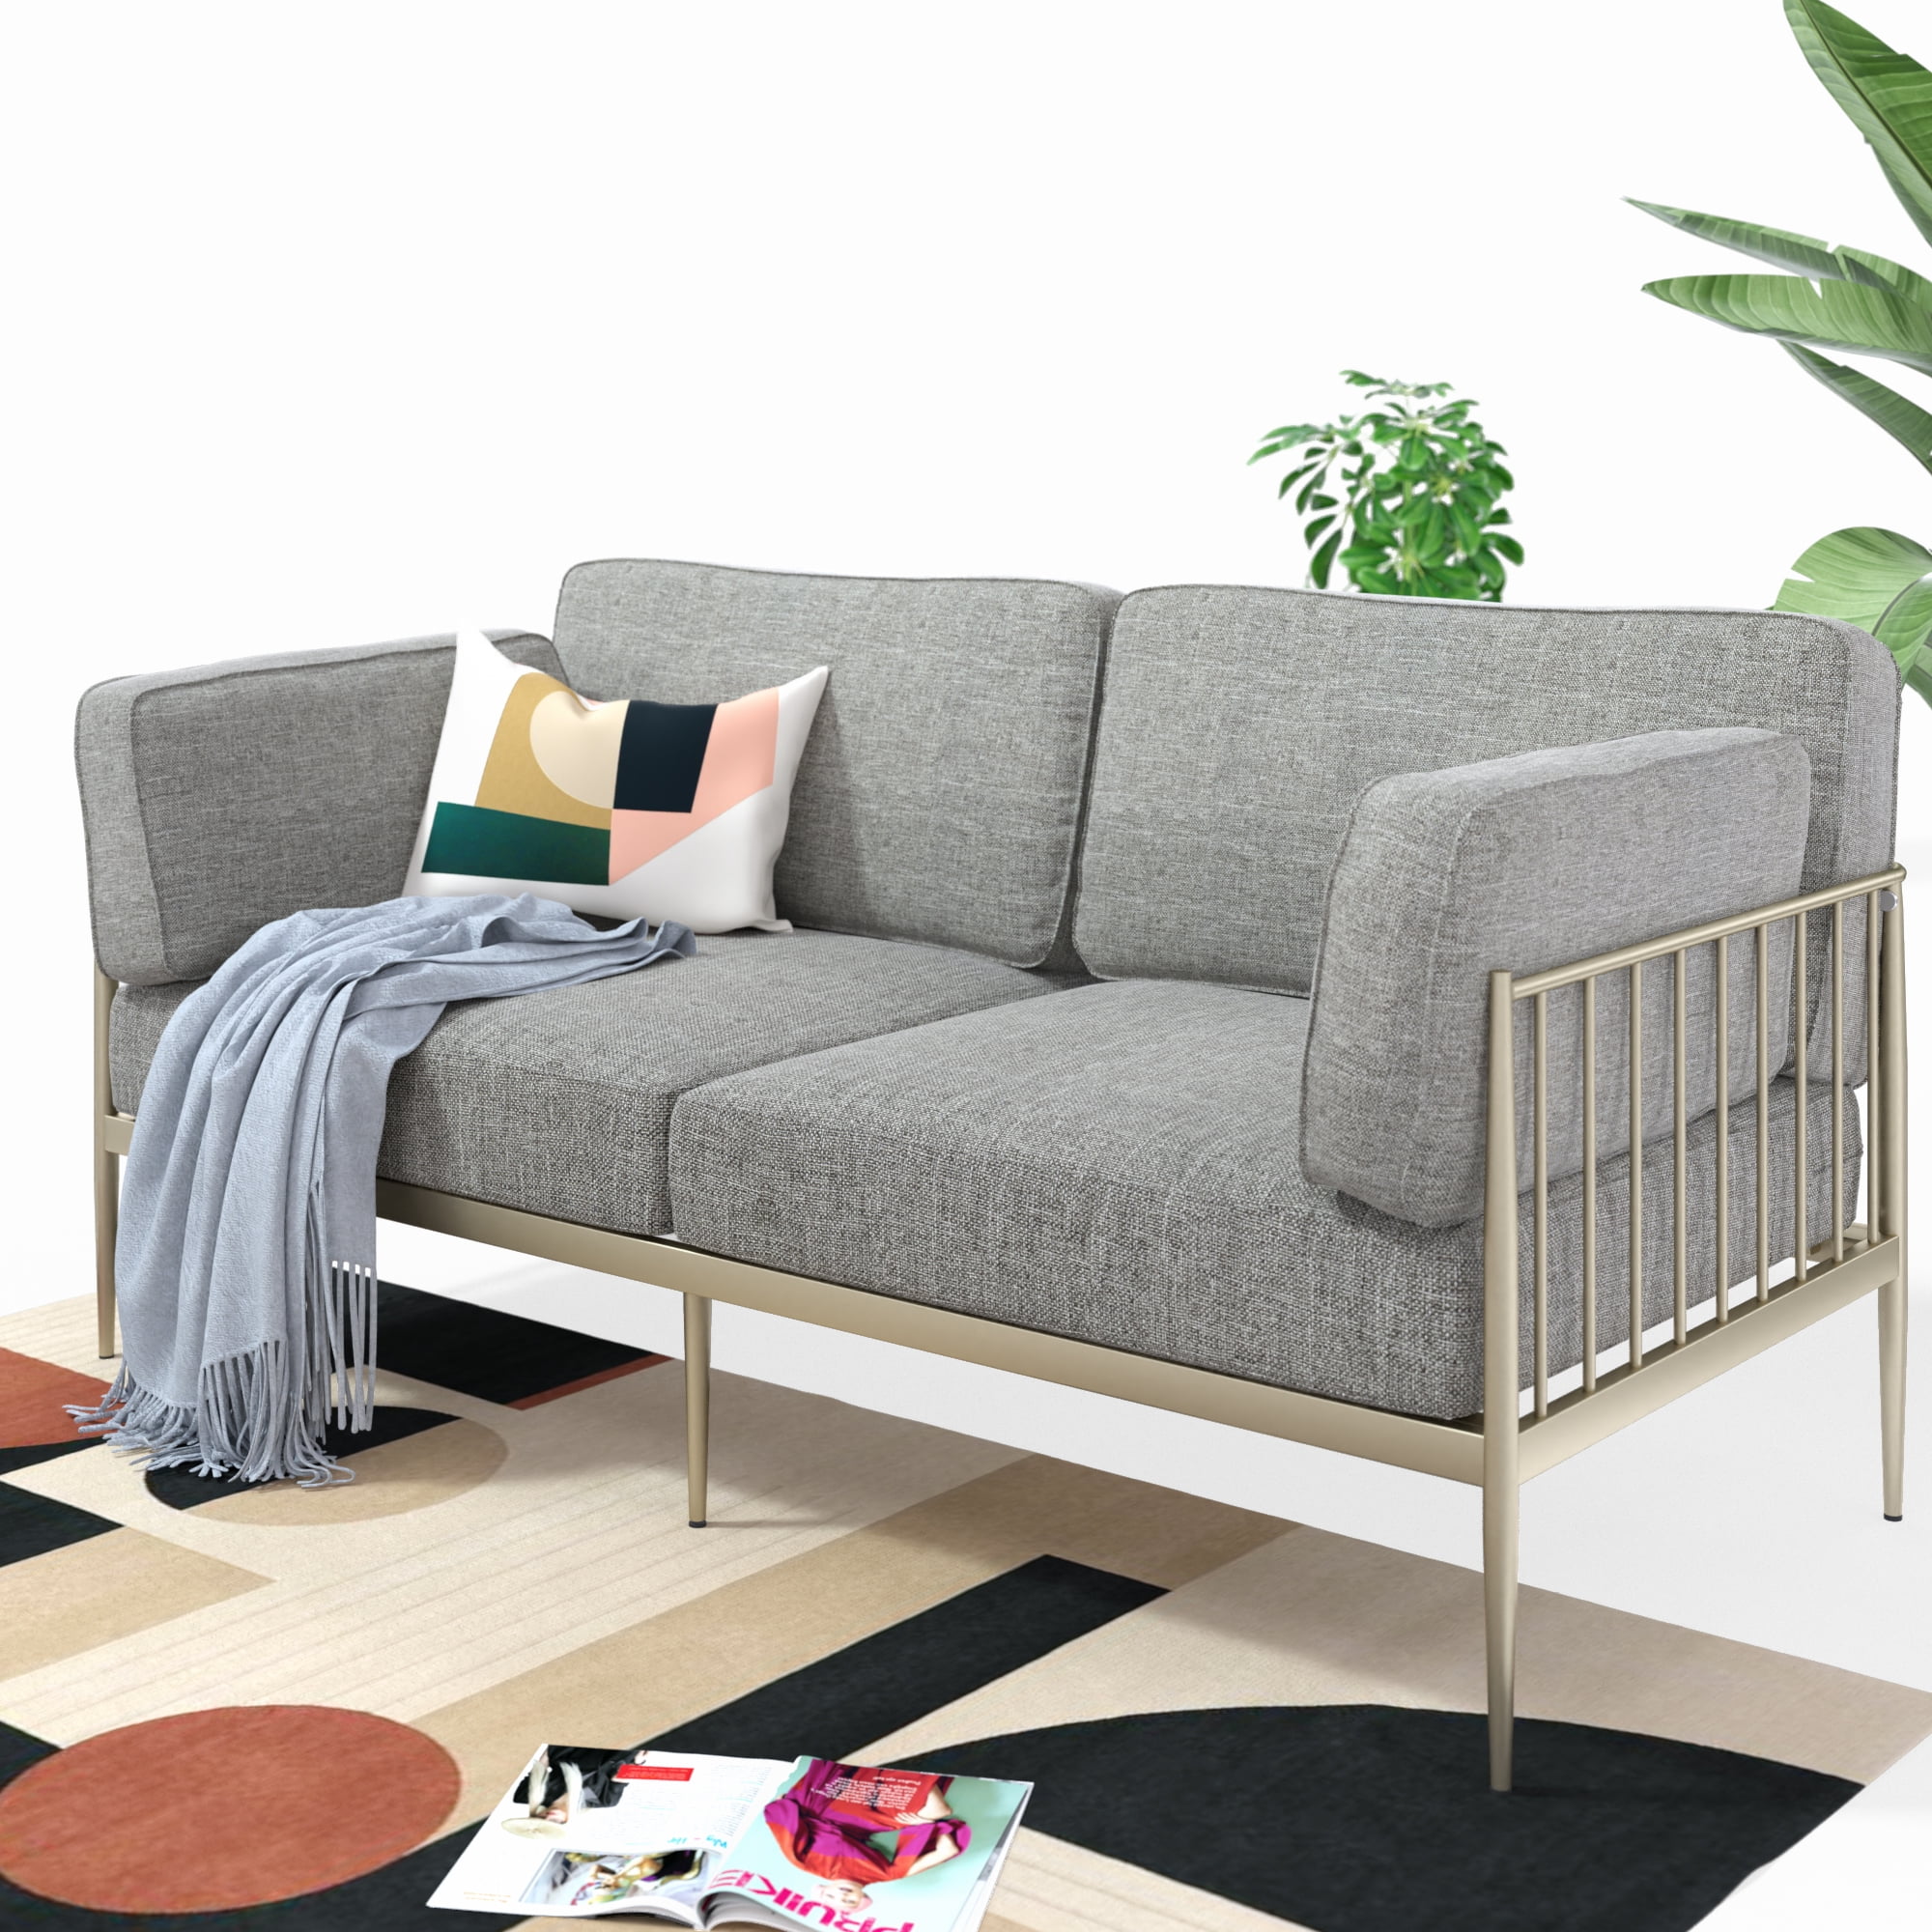 Zinus Janelle Gold Metal Sofa Gray, What Does Sofas Mean In Nutrition